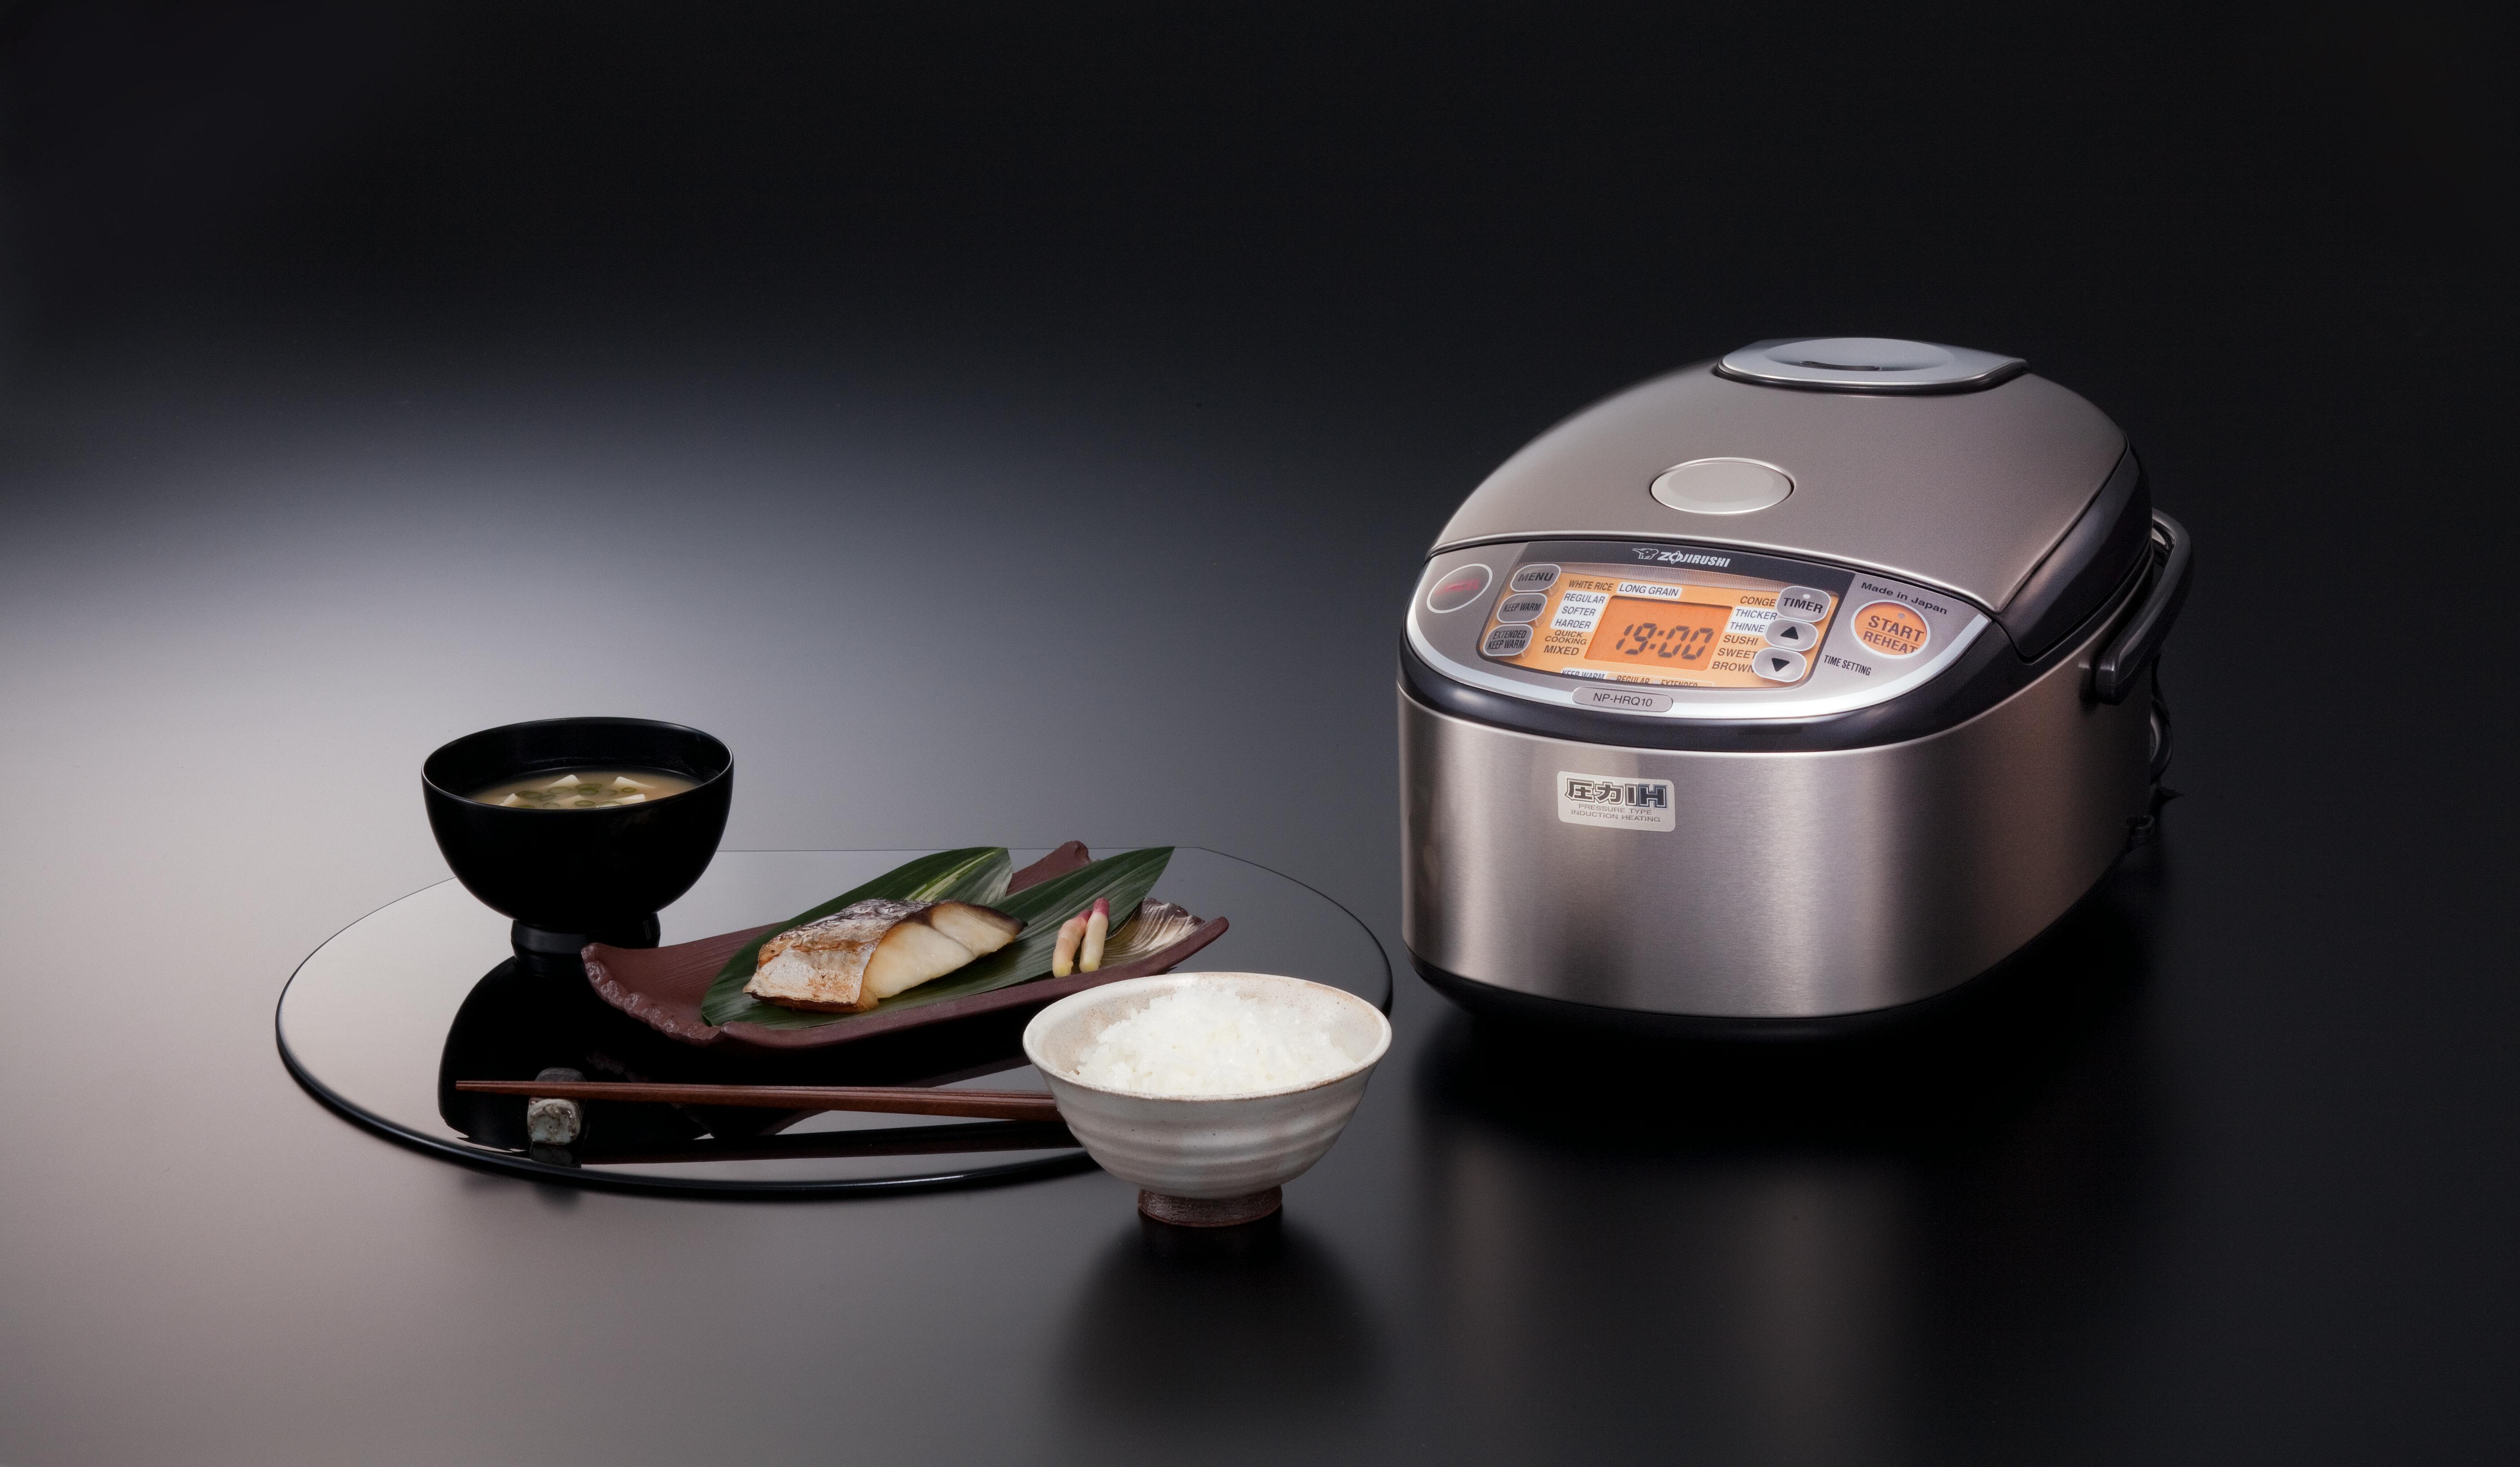 Zojirushi Singapore - The NS-TSQ10/18 Rice Cooker has a special in